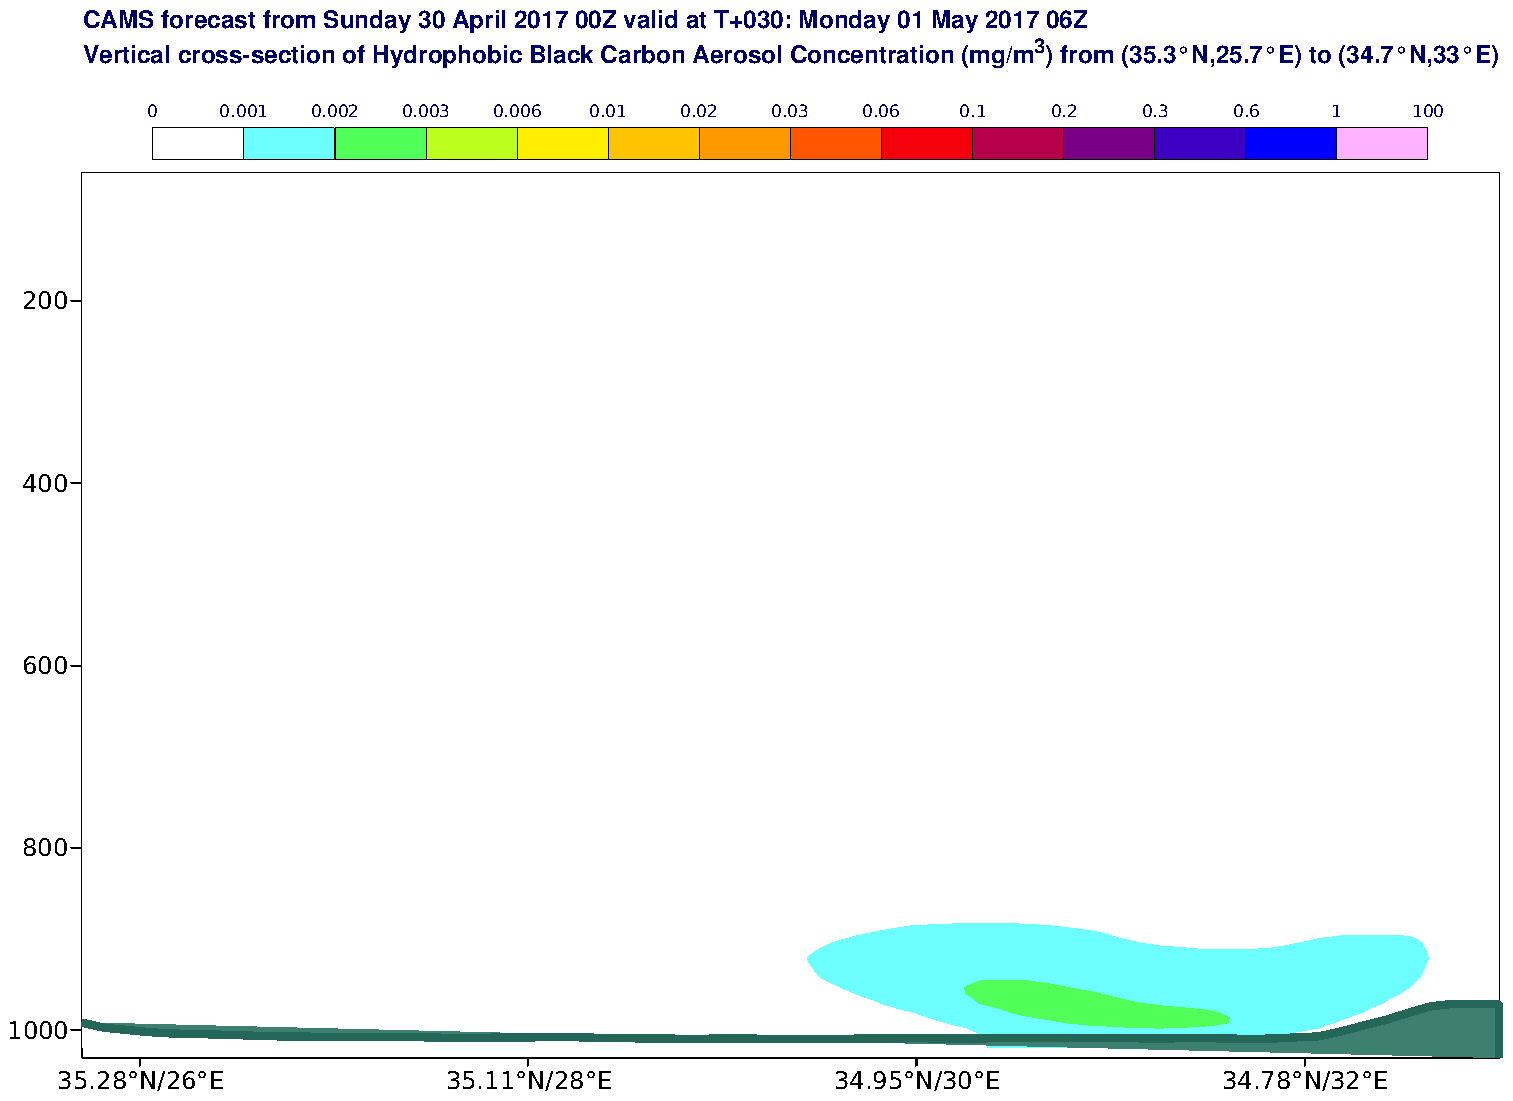 Vertical cross-section of Hydrophobic Black Carbon Aerosol Concentration (mg/m3) valid at T30 - 2017-05-01 06:00